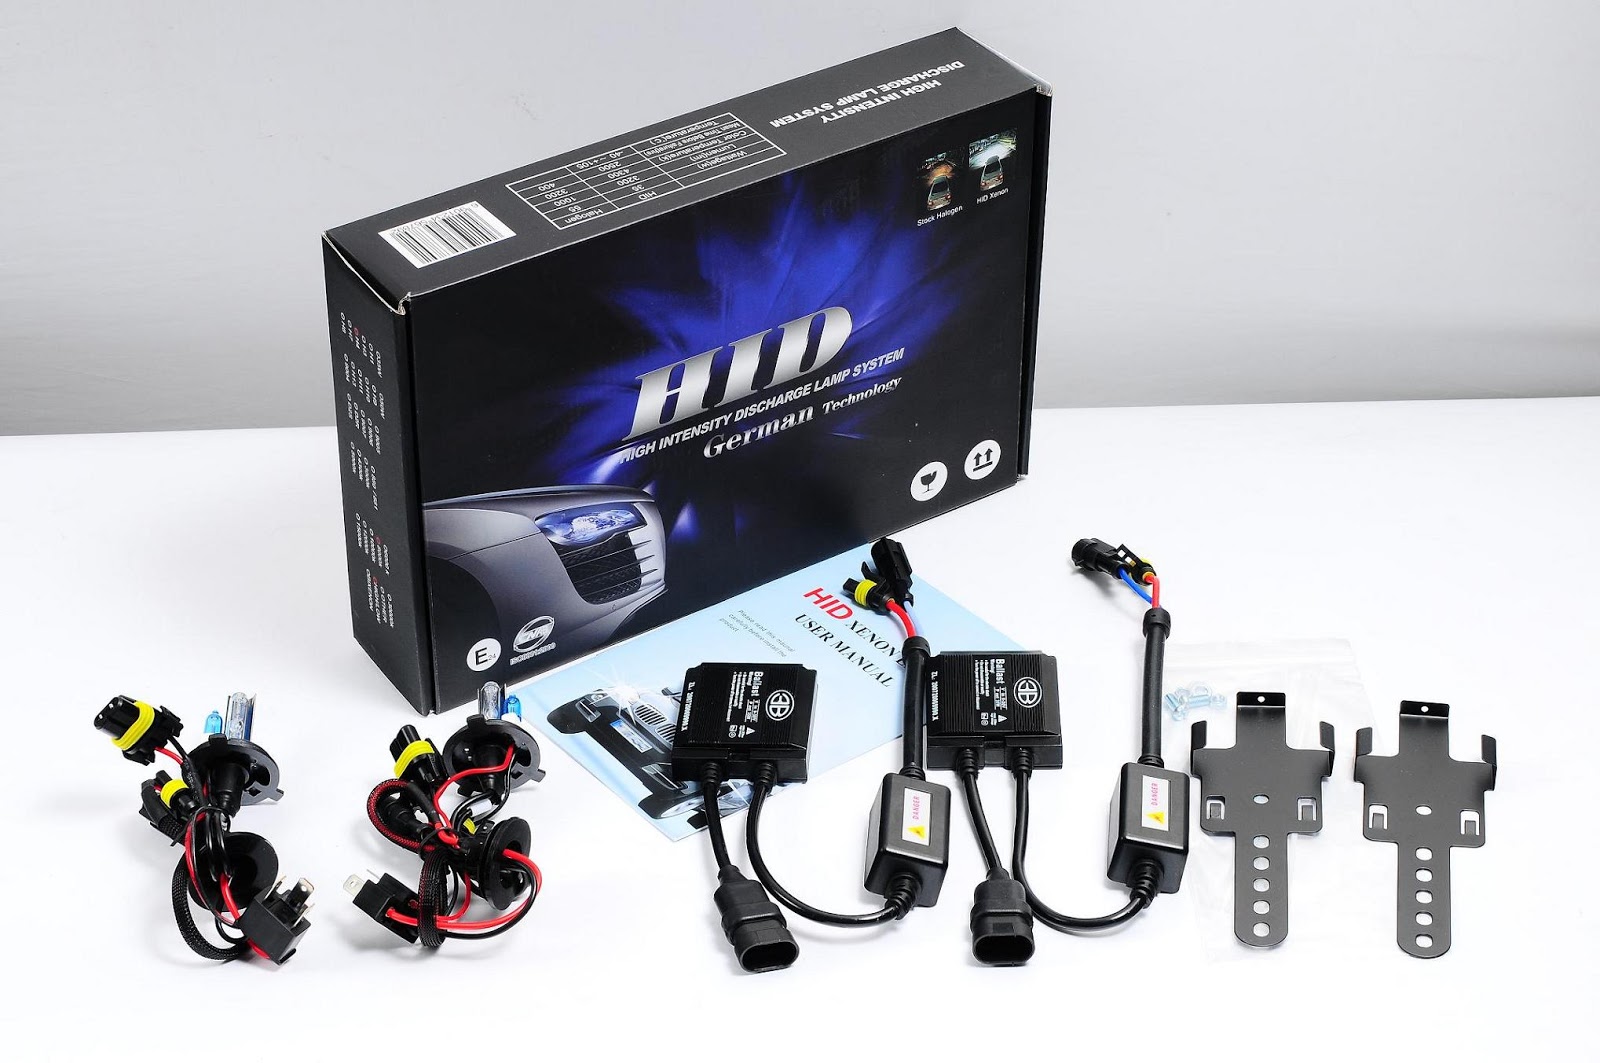 Hid Xenon Kits Performance Over Conventional Halogen Lamps Auto Parts